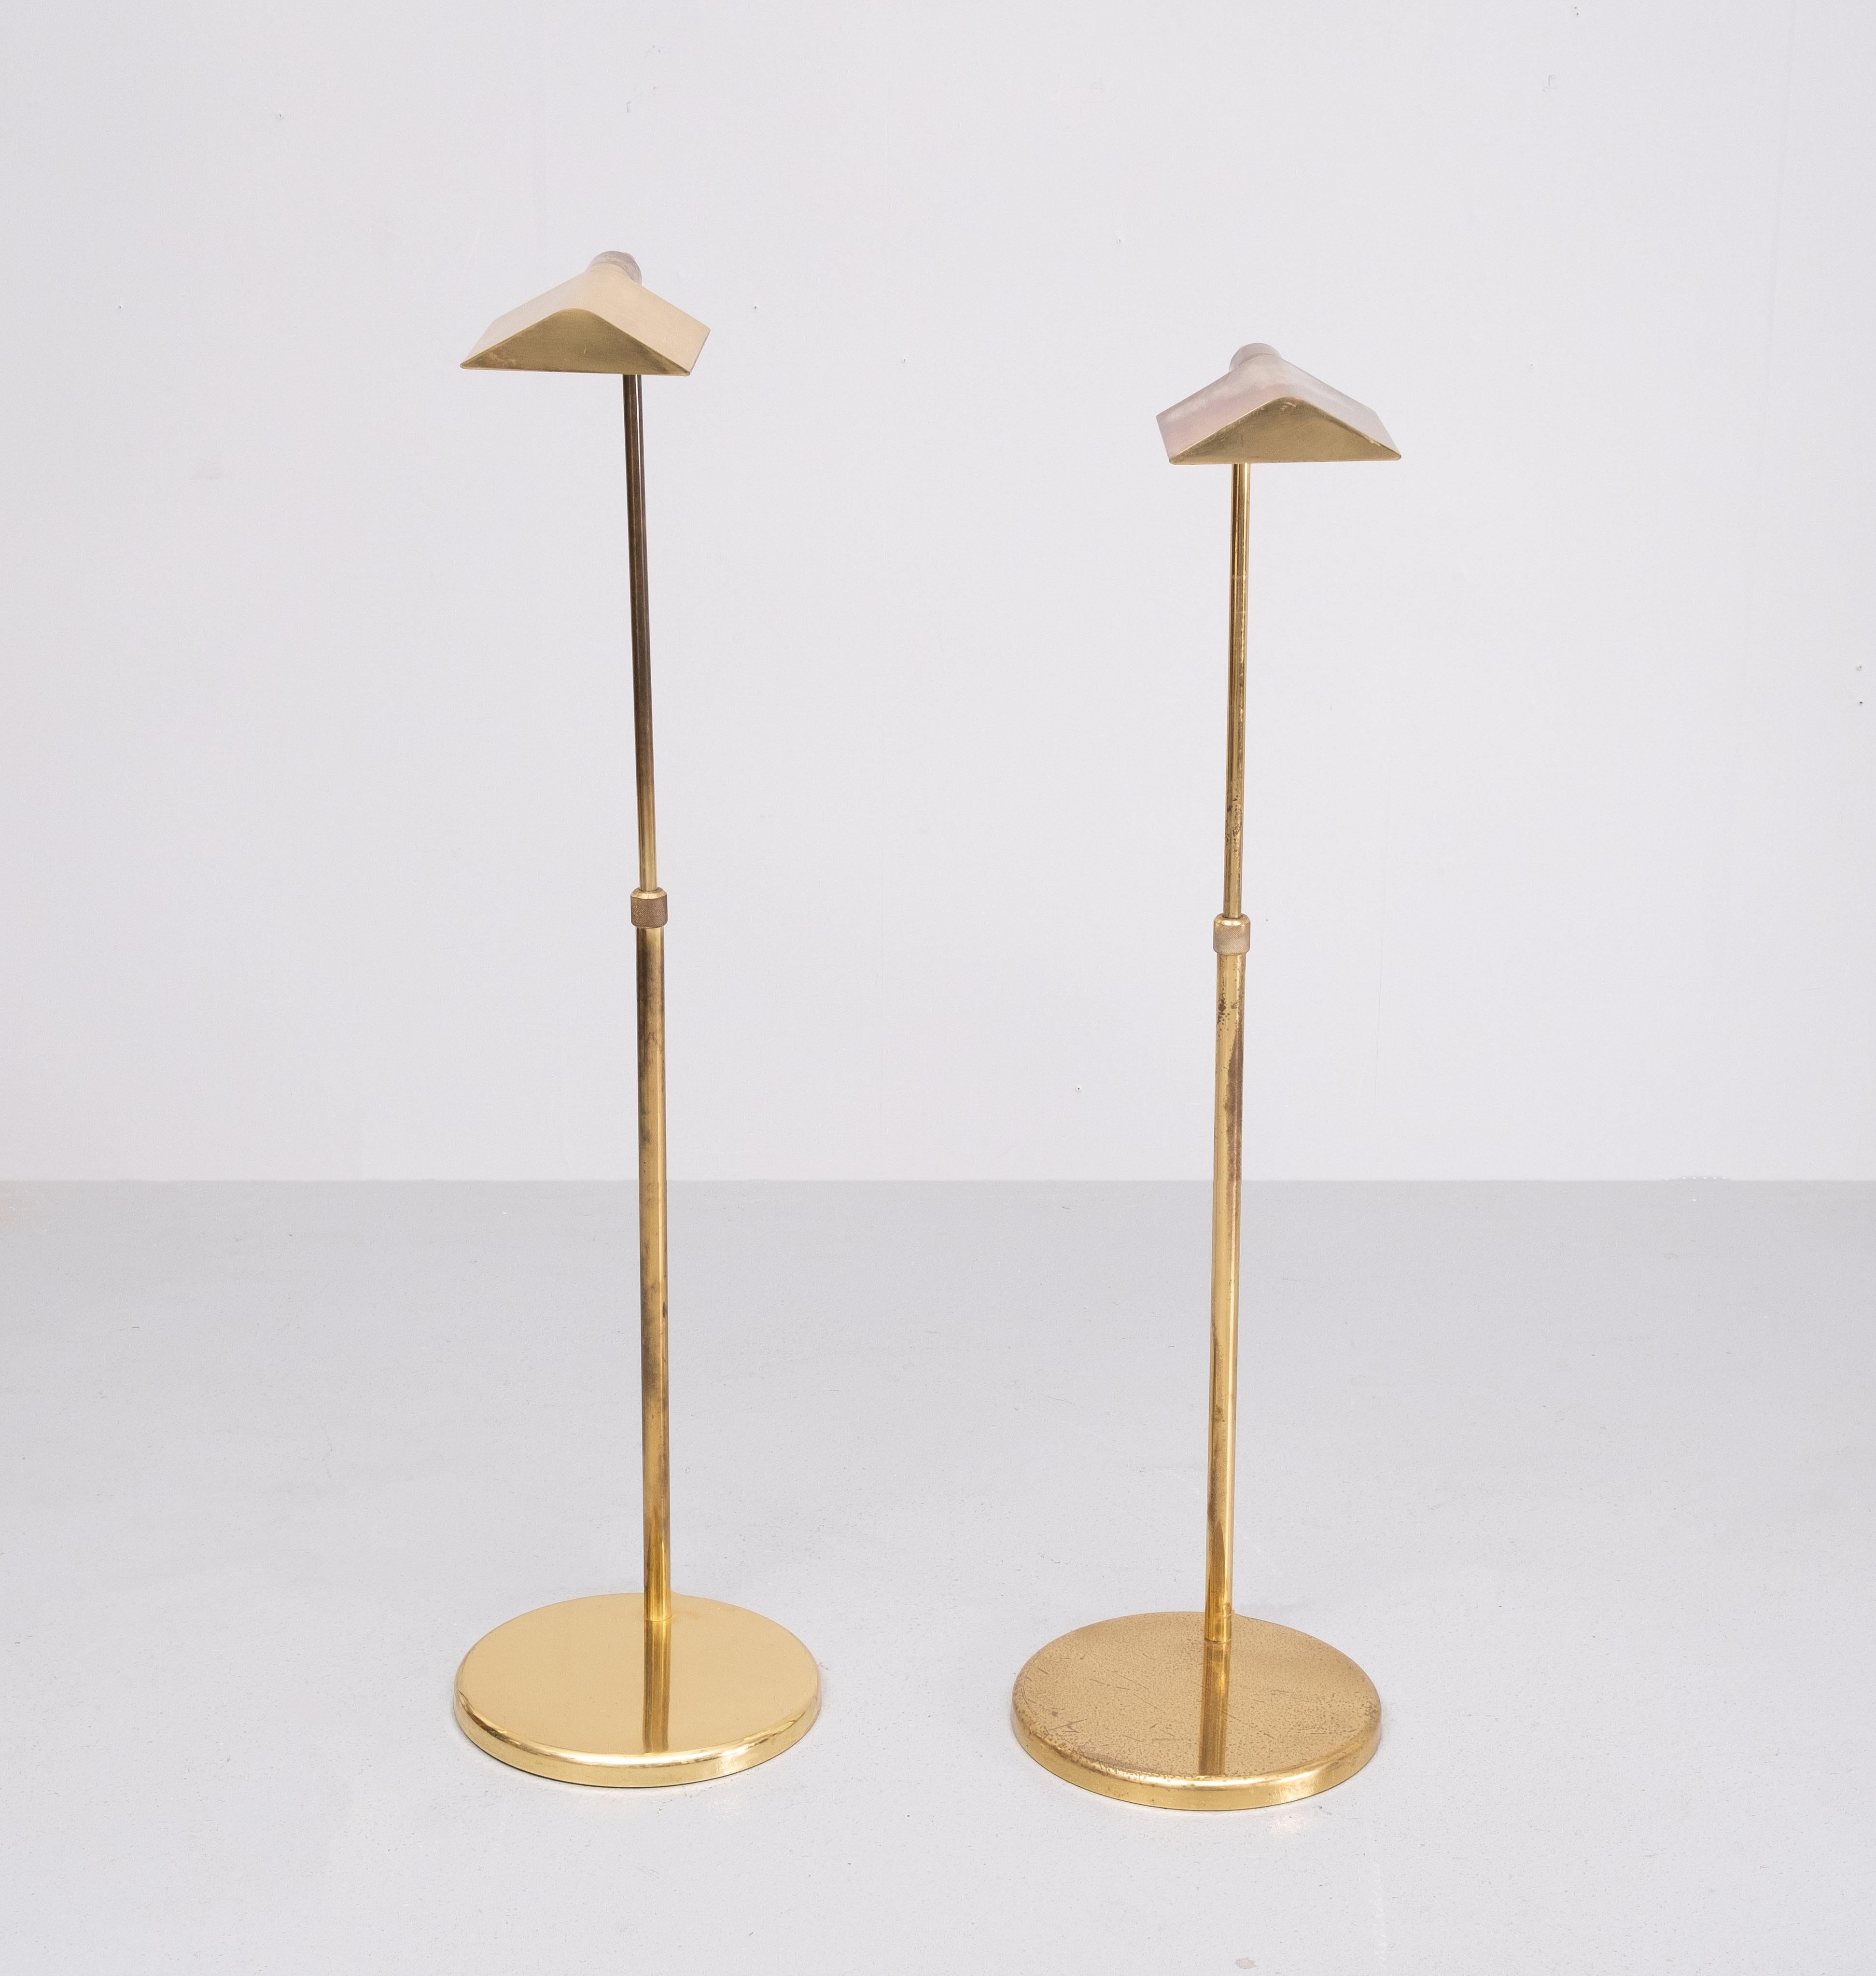 Gorgeous pair of mid-century modern height adjustable pharmacy floor lamps featuring a solid Brass finish.  The light on and off switch with a Brass hardware knob. Beautifully crafted with a Brass  tightening ring in the center of the shaft to lock